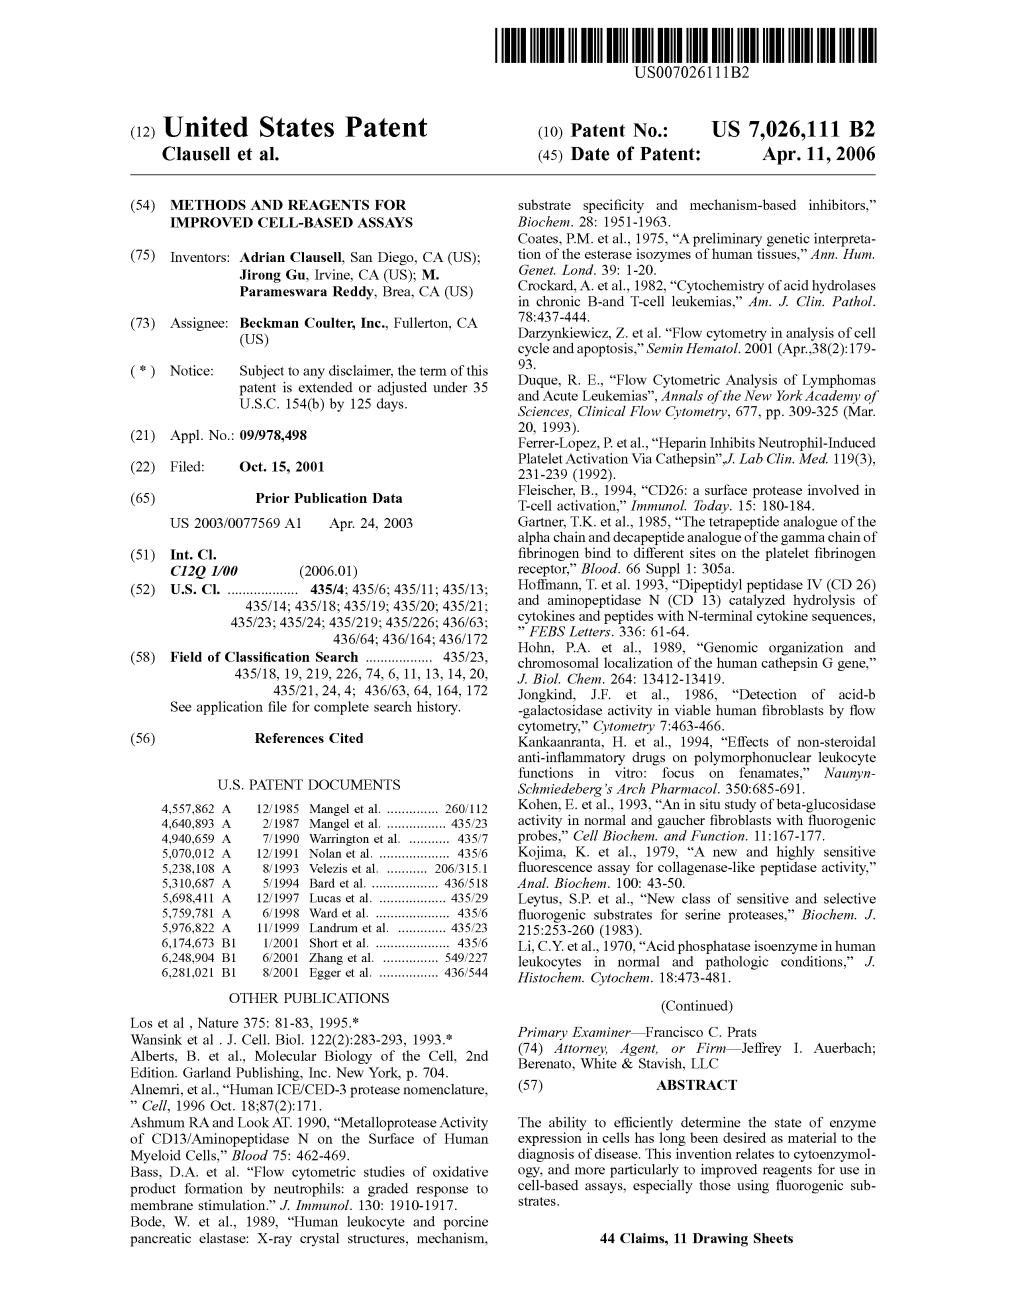 (12) United States Patent (10) Patent No.: US 7,026,111 B2 Clausell Et Al